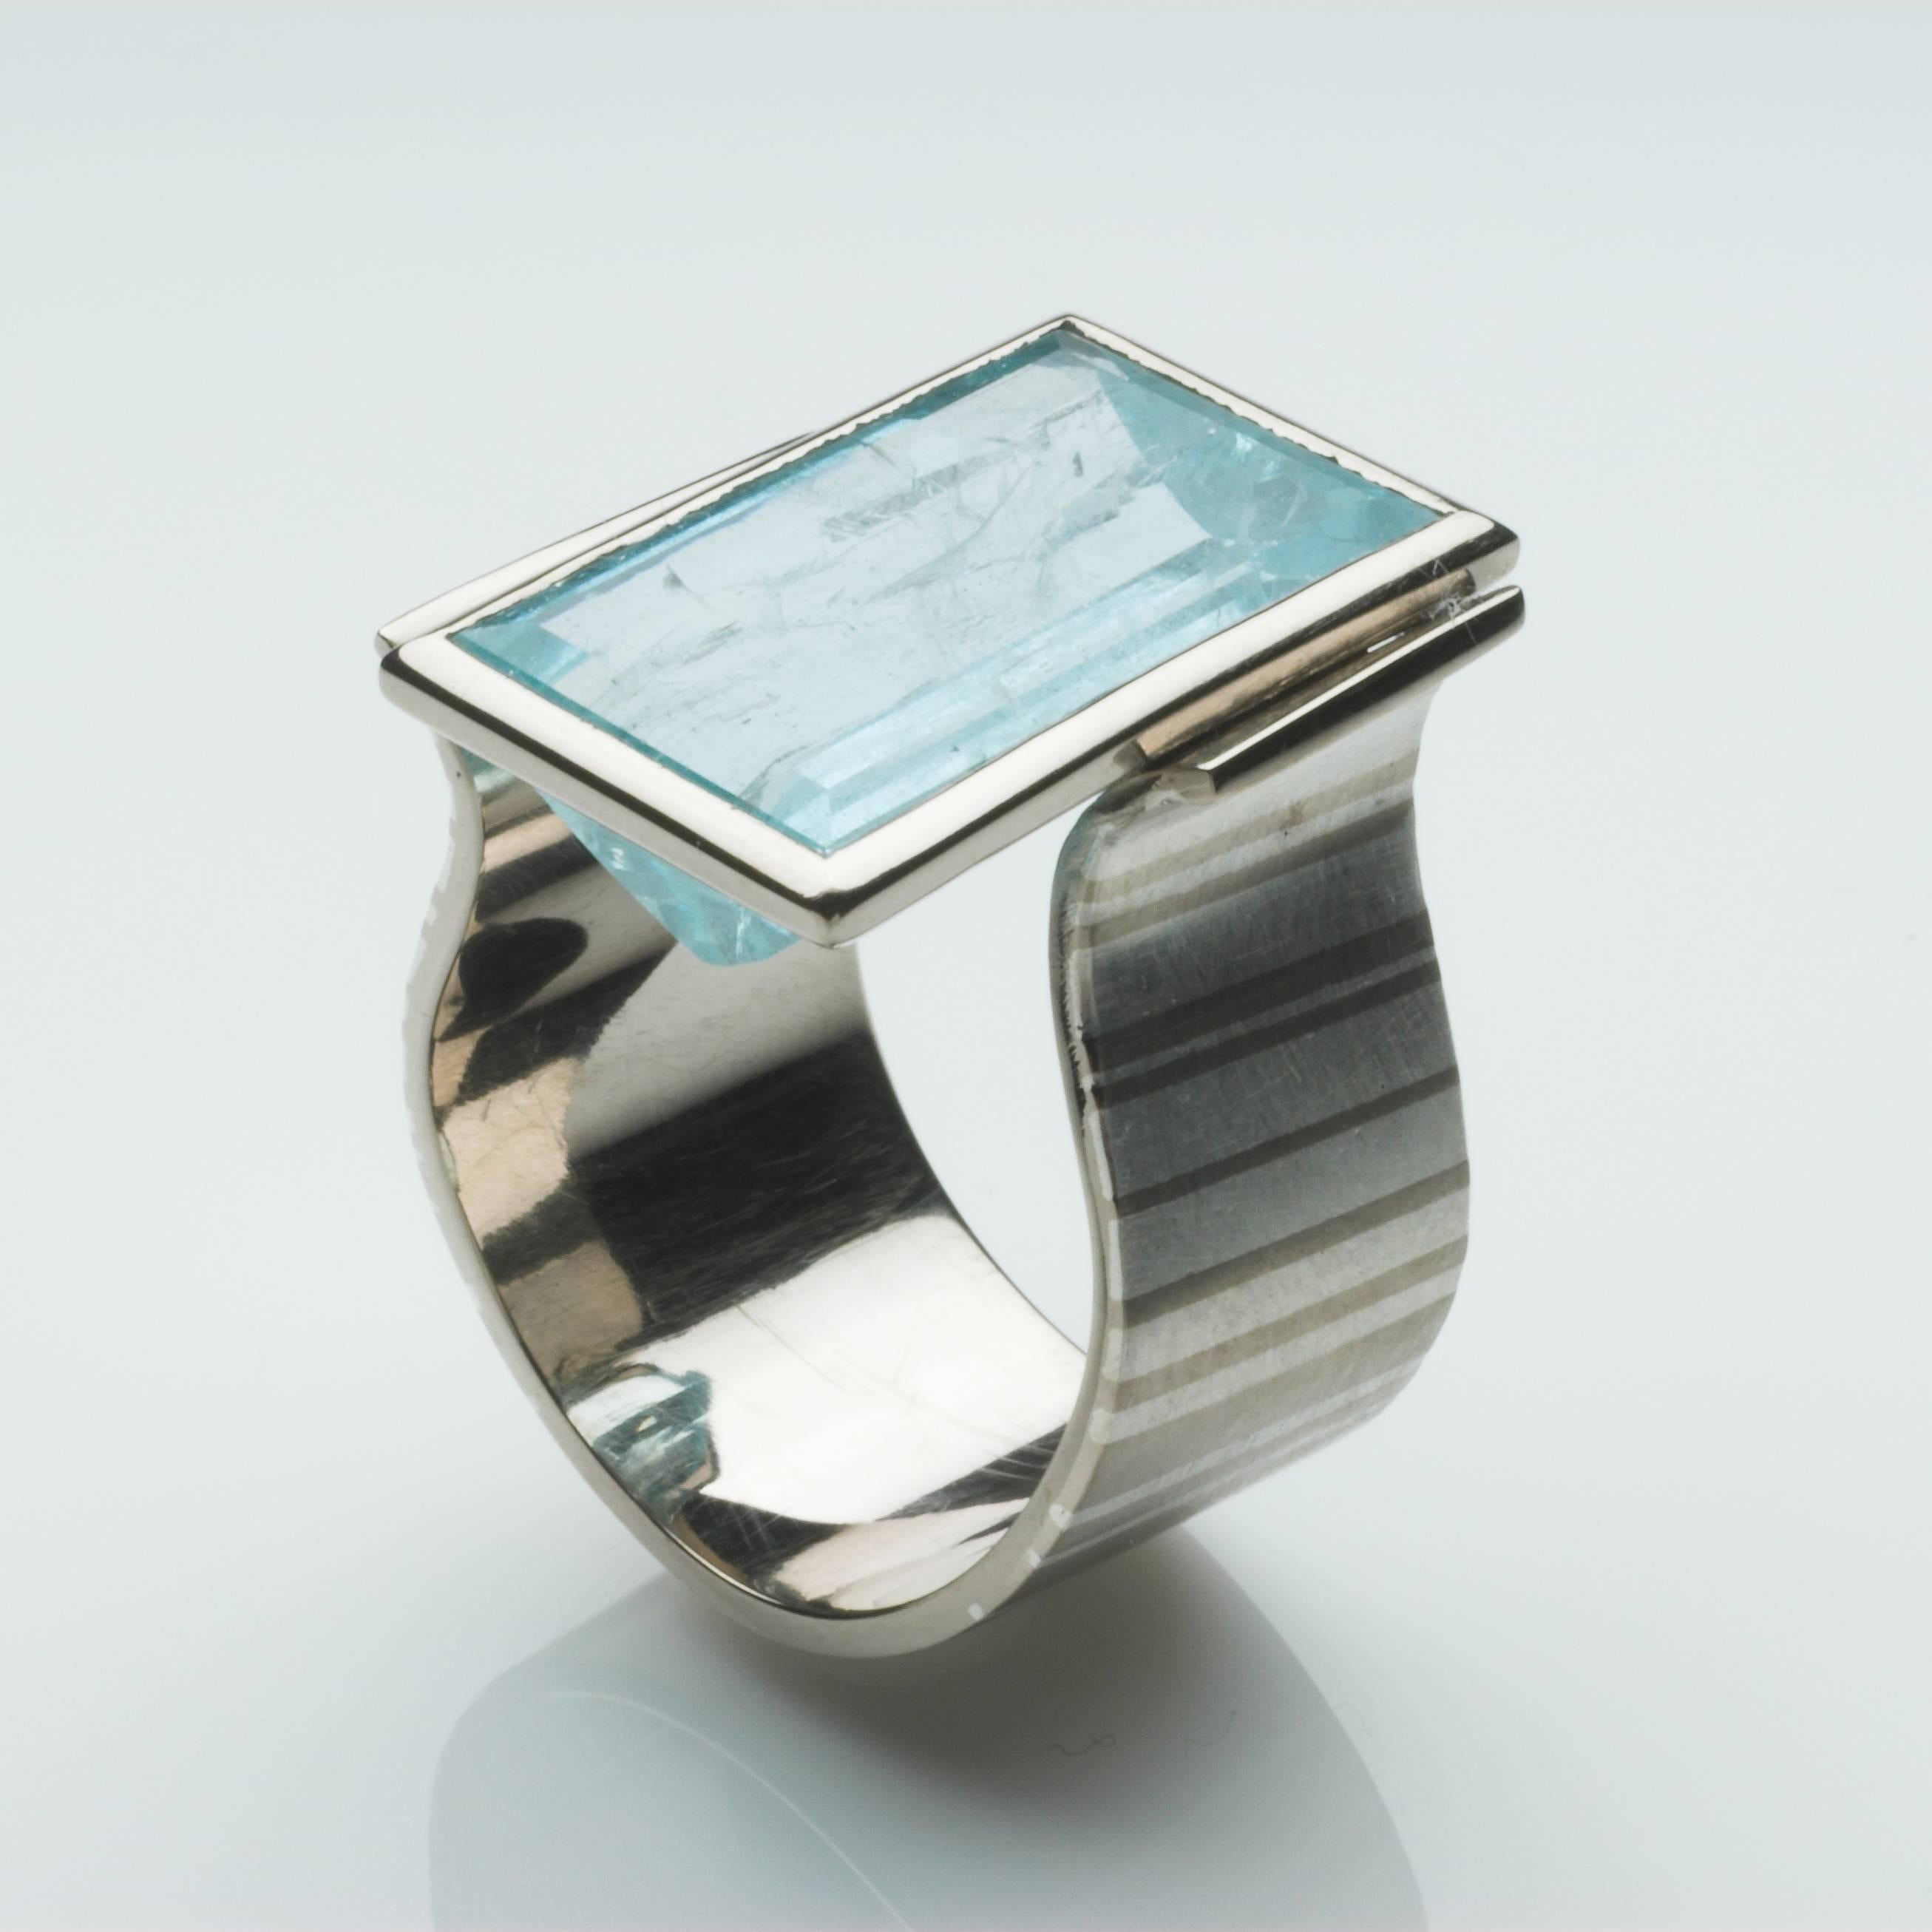 Barcode ring in 18ct white gold, with a fused fine silver inlay forming contrasting varying width stripes, set with a large rectangular aquamarine. The stripes in the ring shank are echoed in the cut of the stone.
UK ring size: O